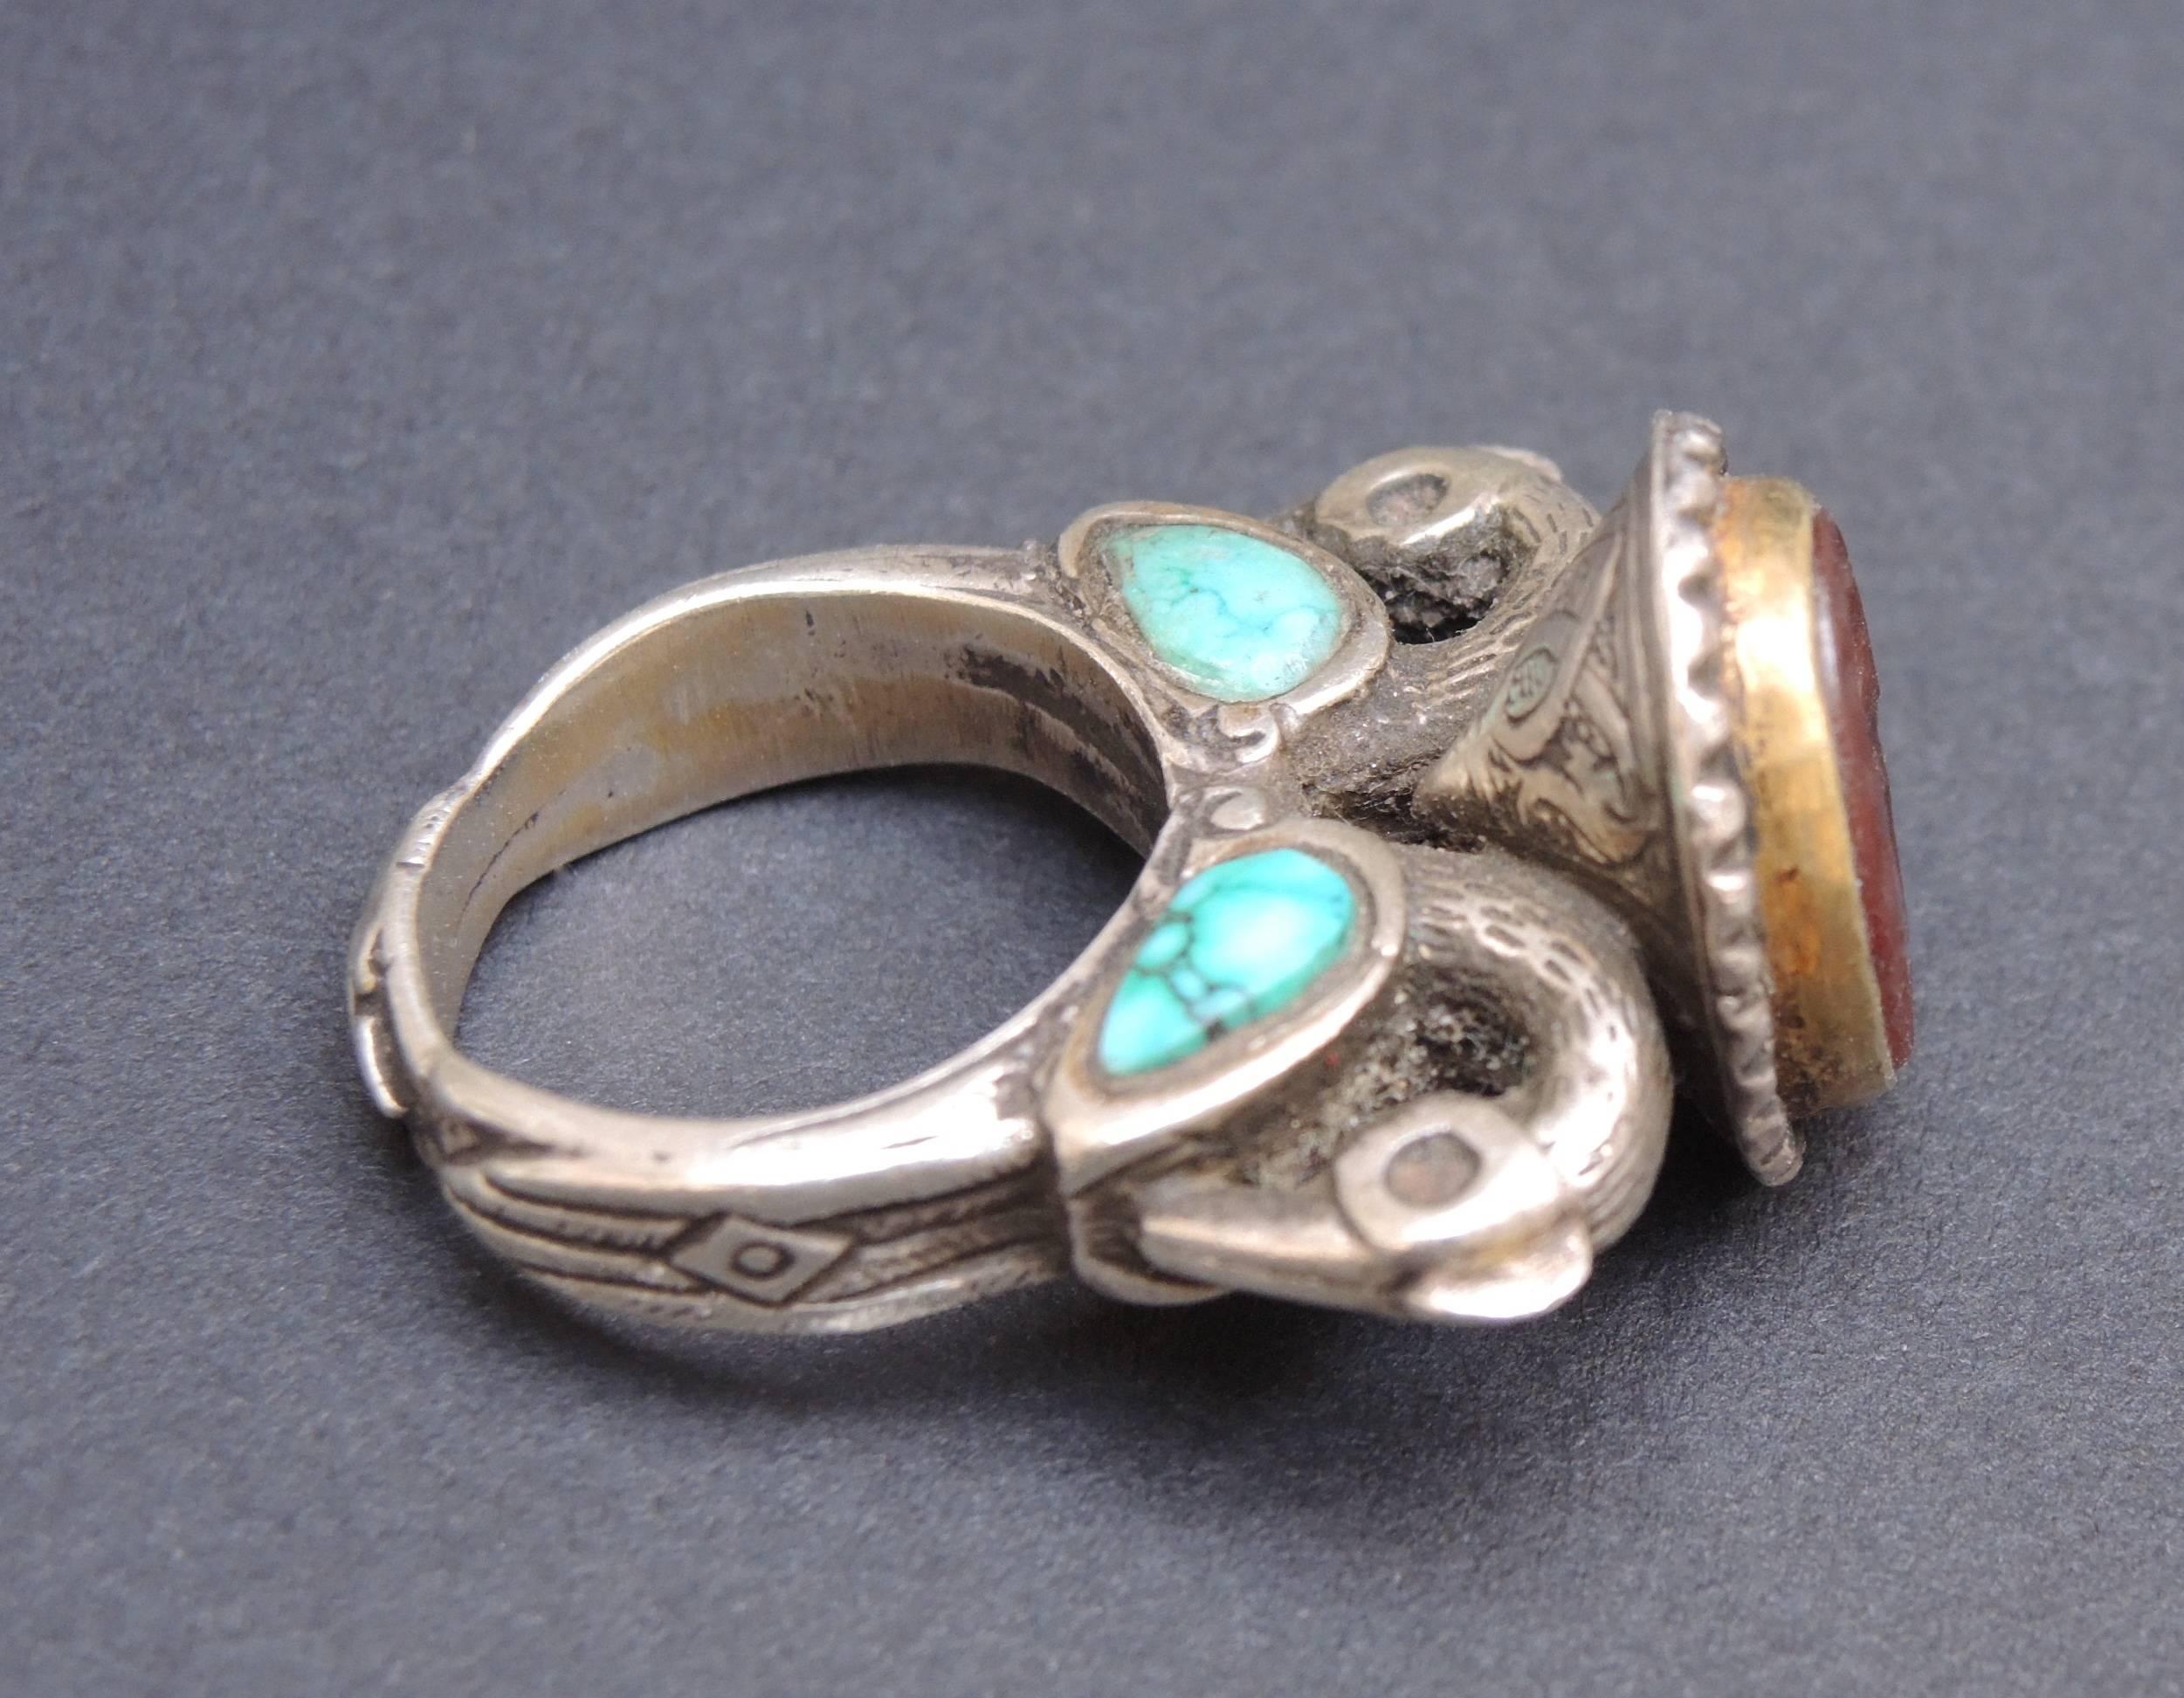 A stunning large ethnic tribal ring with carved carnelian stone intaglio. The ring is hand cast bronze plated in silver with a large bezel set intaglio carved carnelian stone flanked by stylised rams heads and turquoise stones.
The size is between